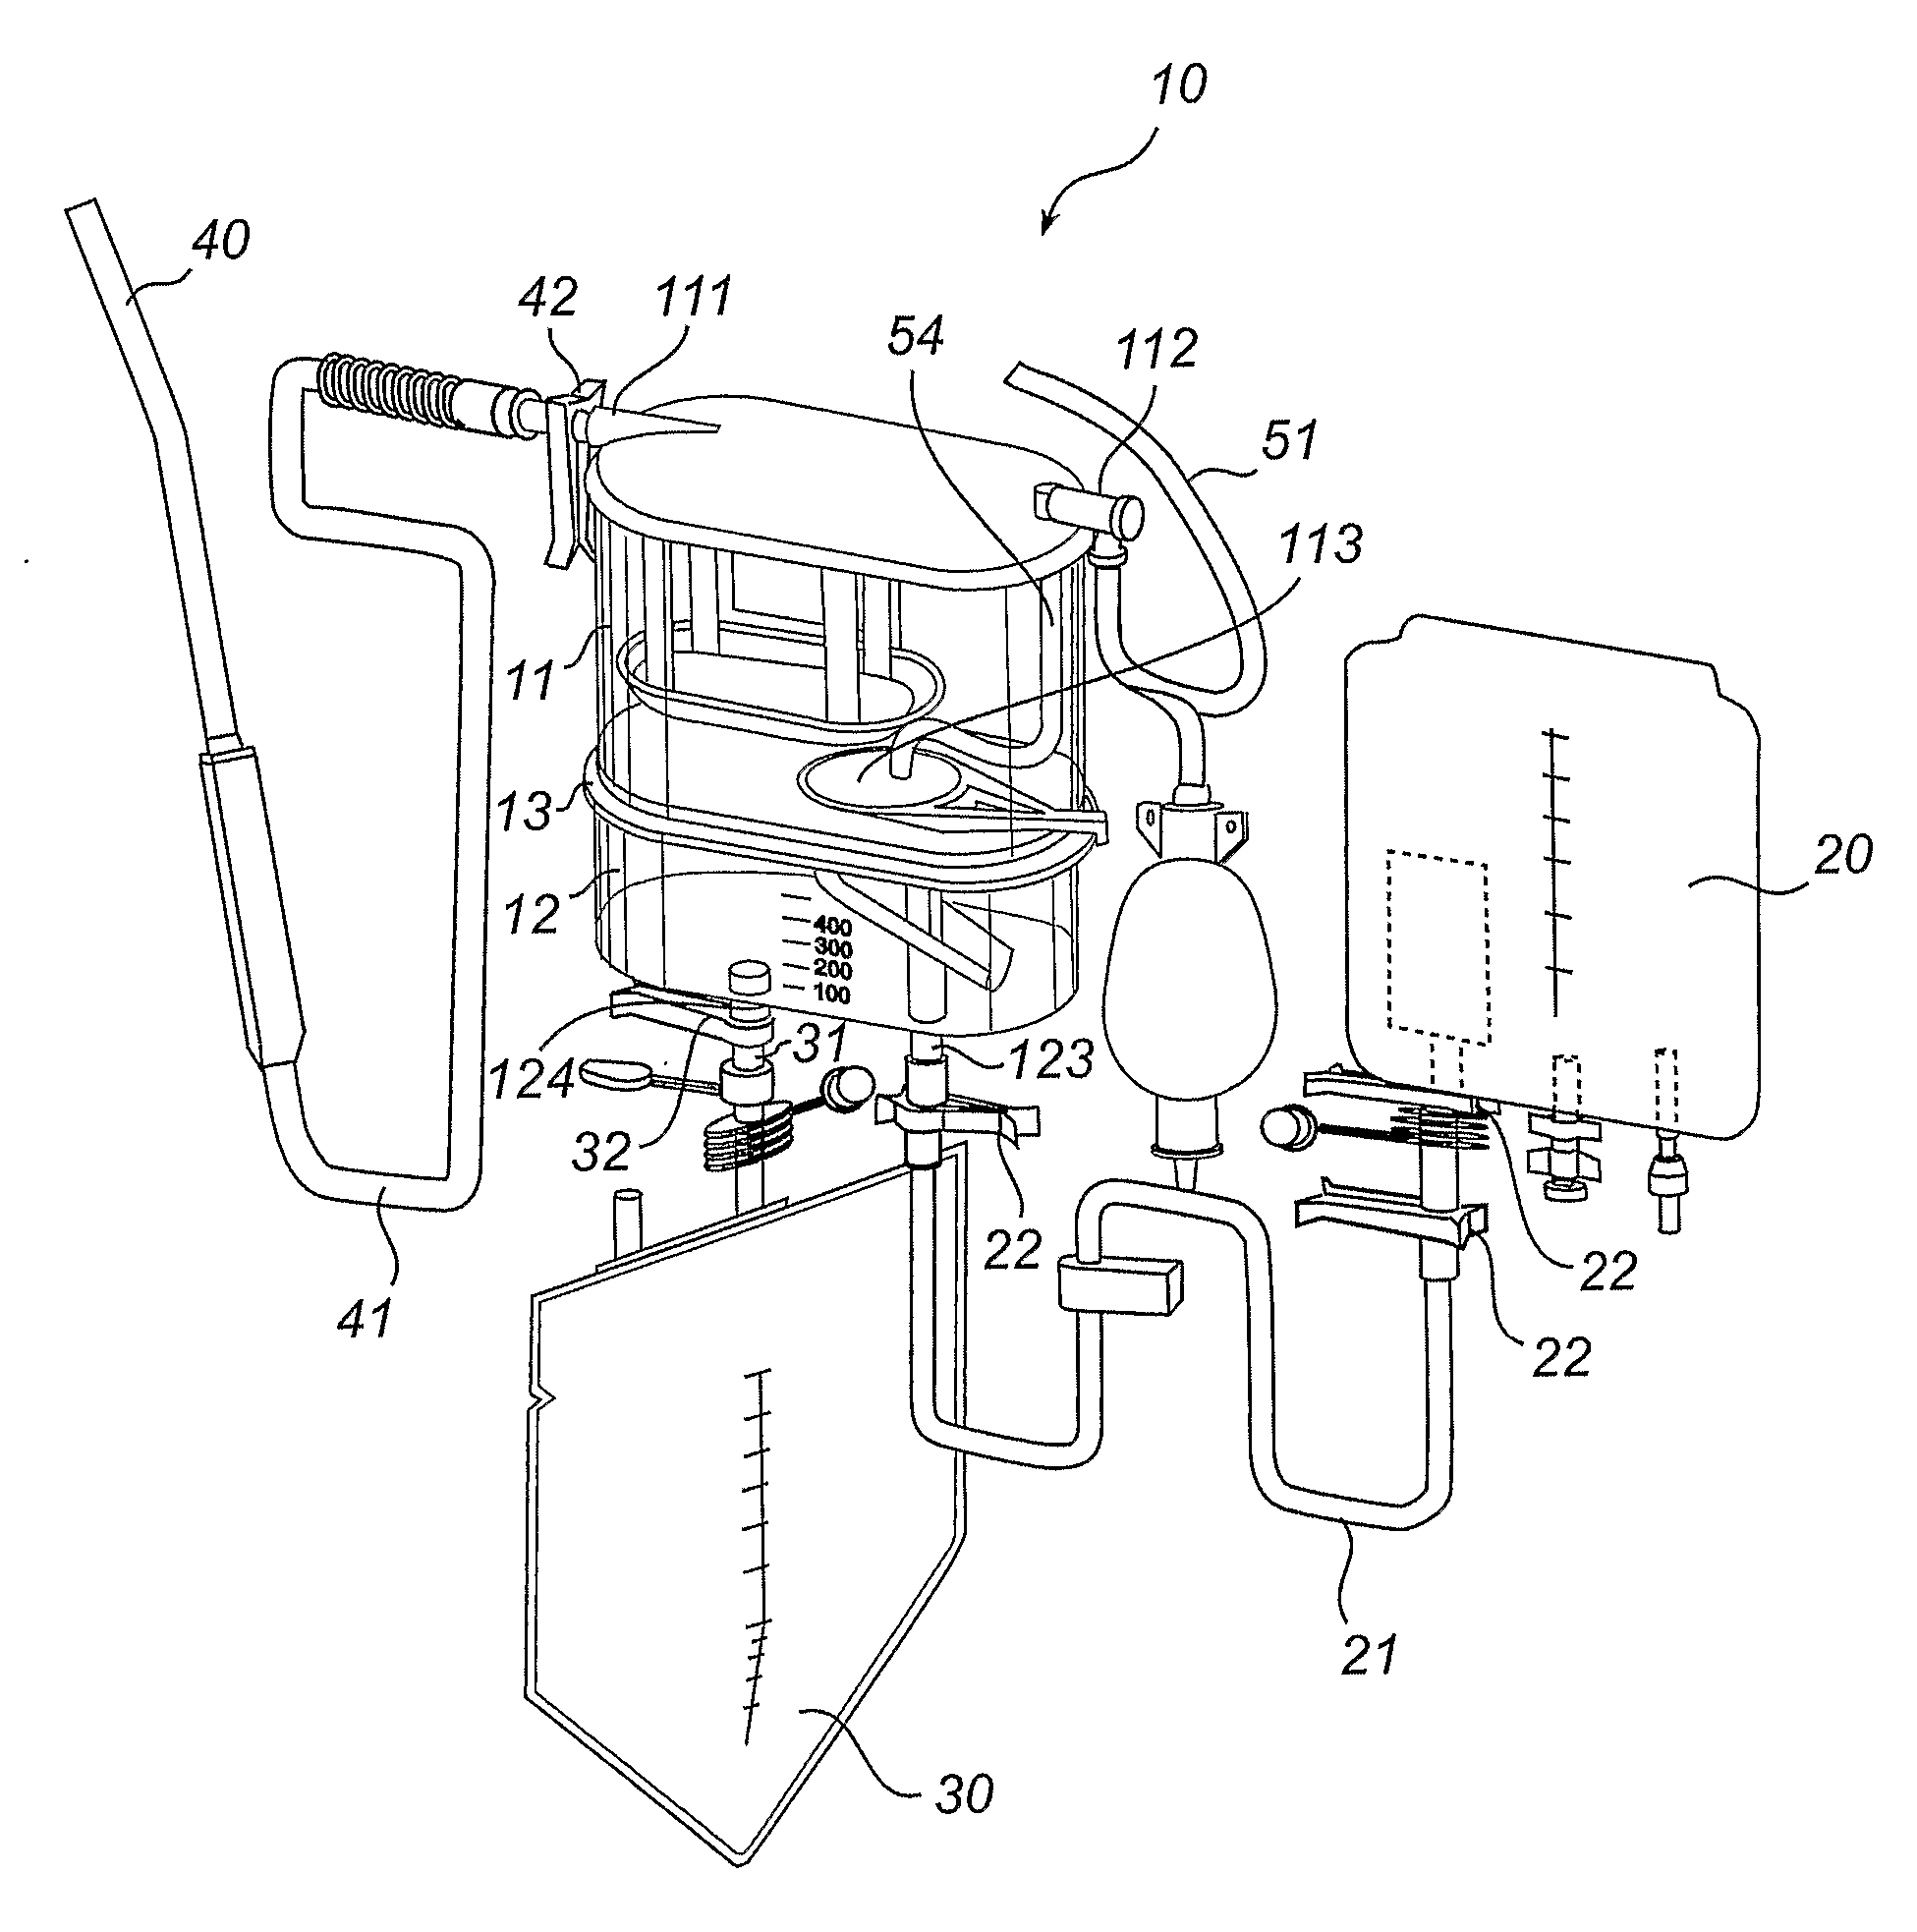 Method and Apparatus For Autotransfusion